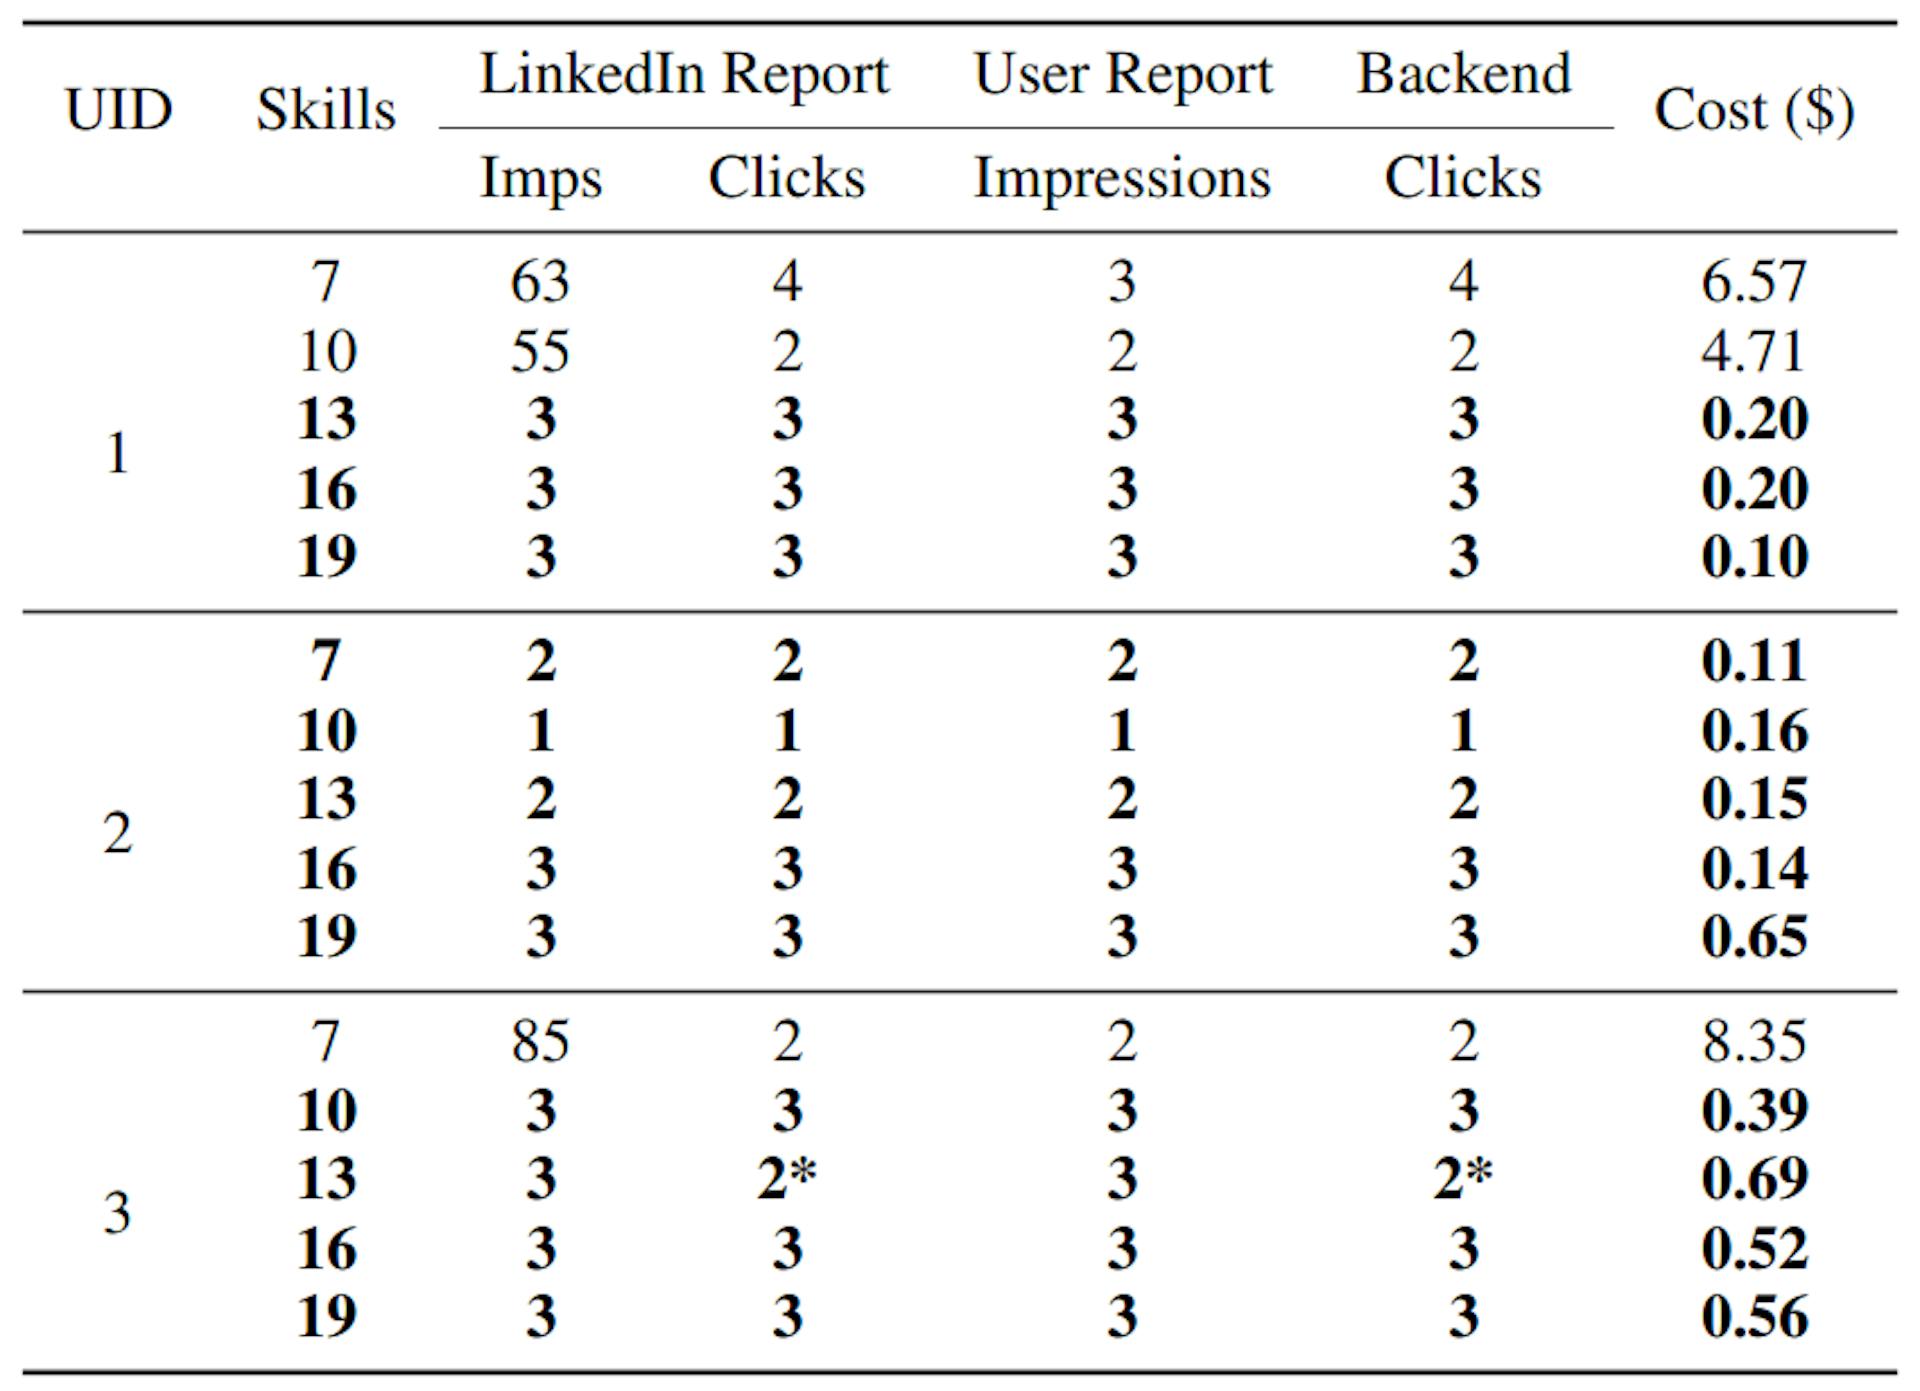 Table 3: Results of the proof of concept experiment. Under LinkedIn Report, the results reported by the LinkedInCampaign Manager; under user report, the impressions the user notified for each campaign; and under Backend Log,